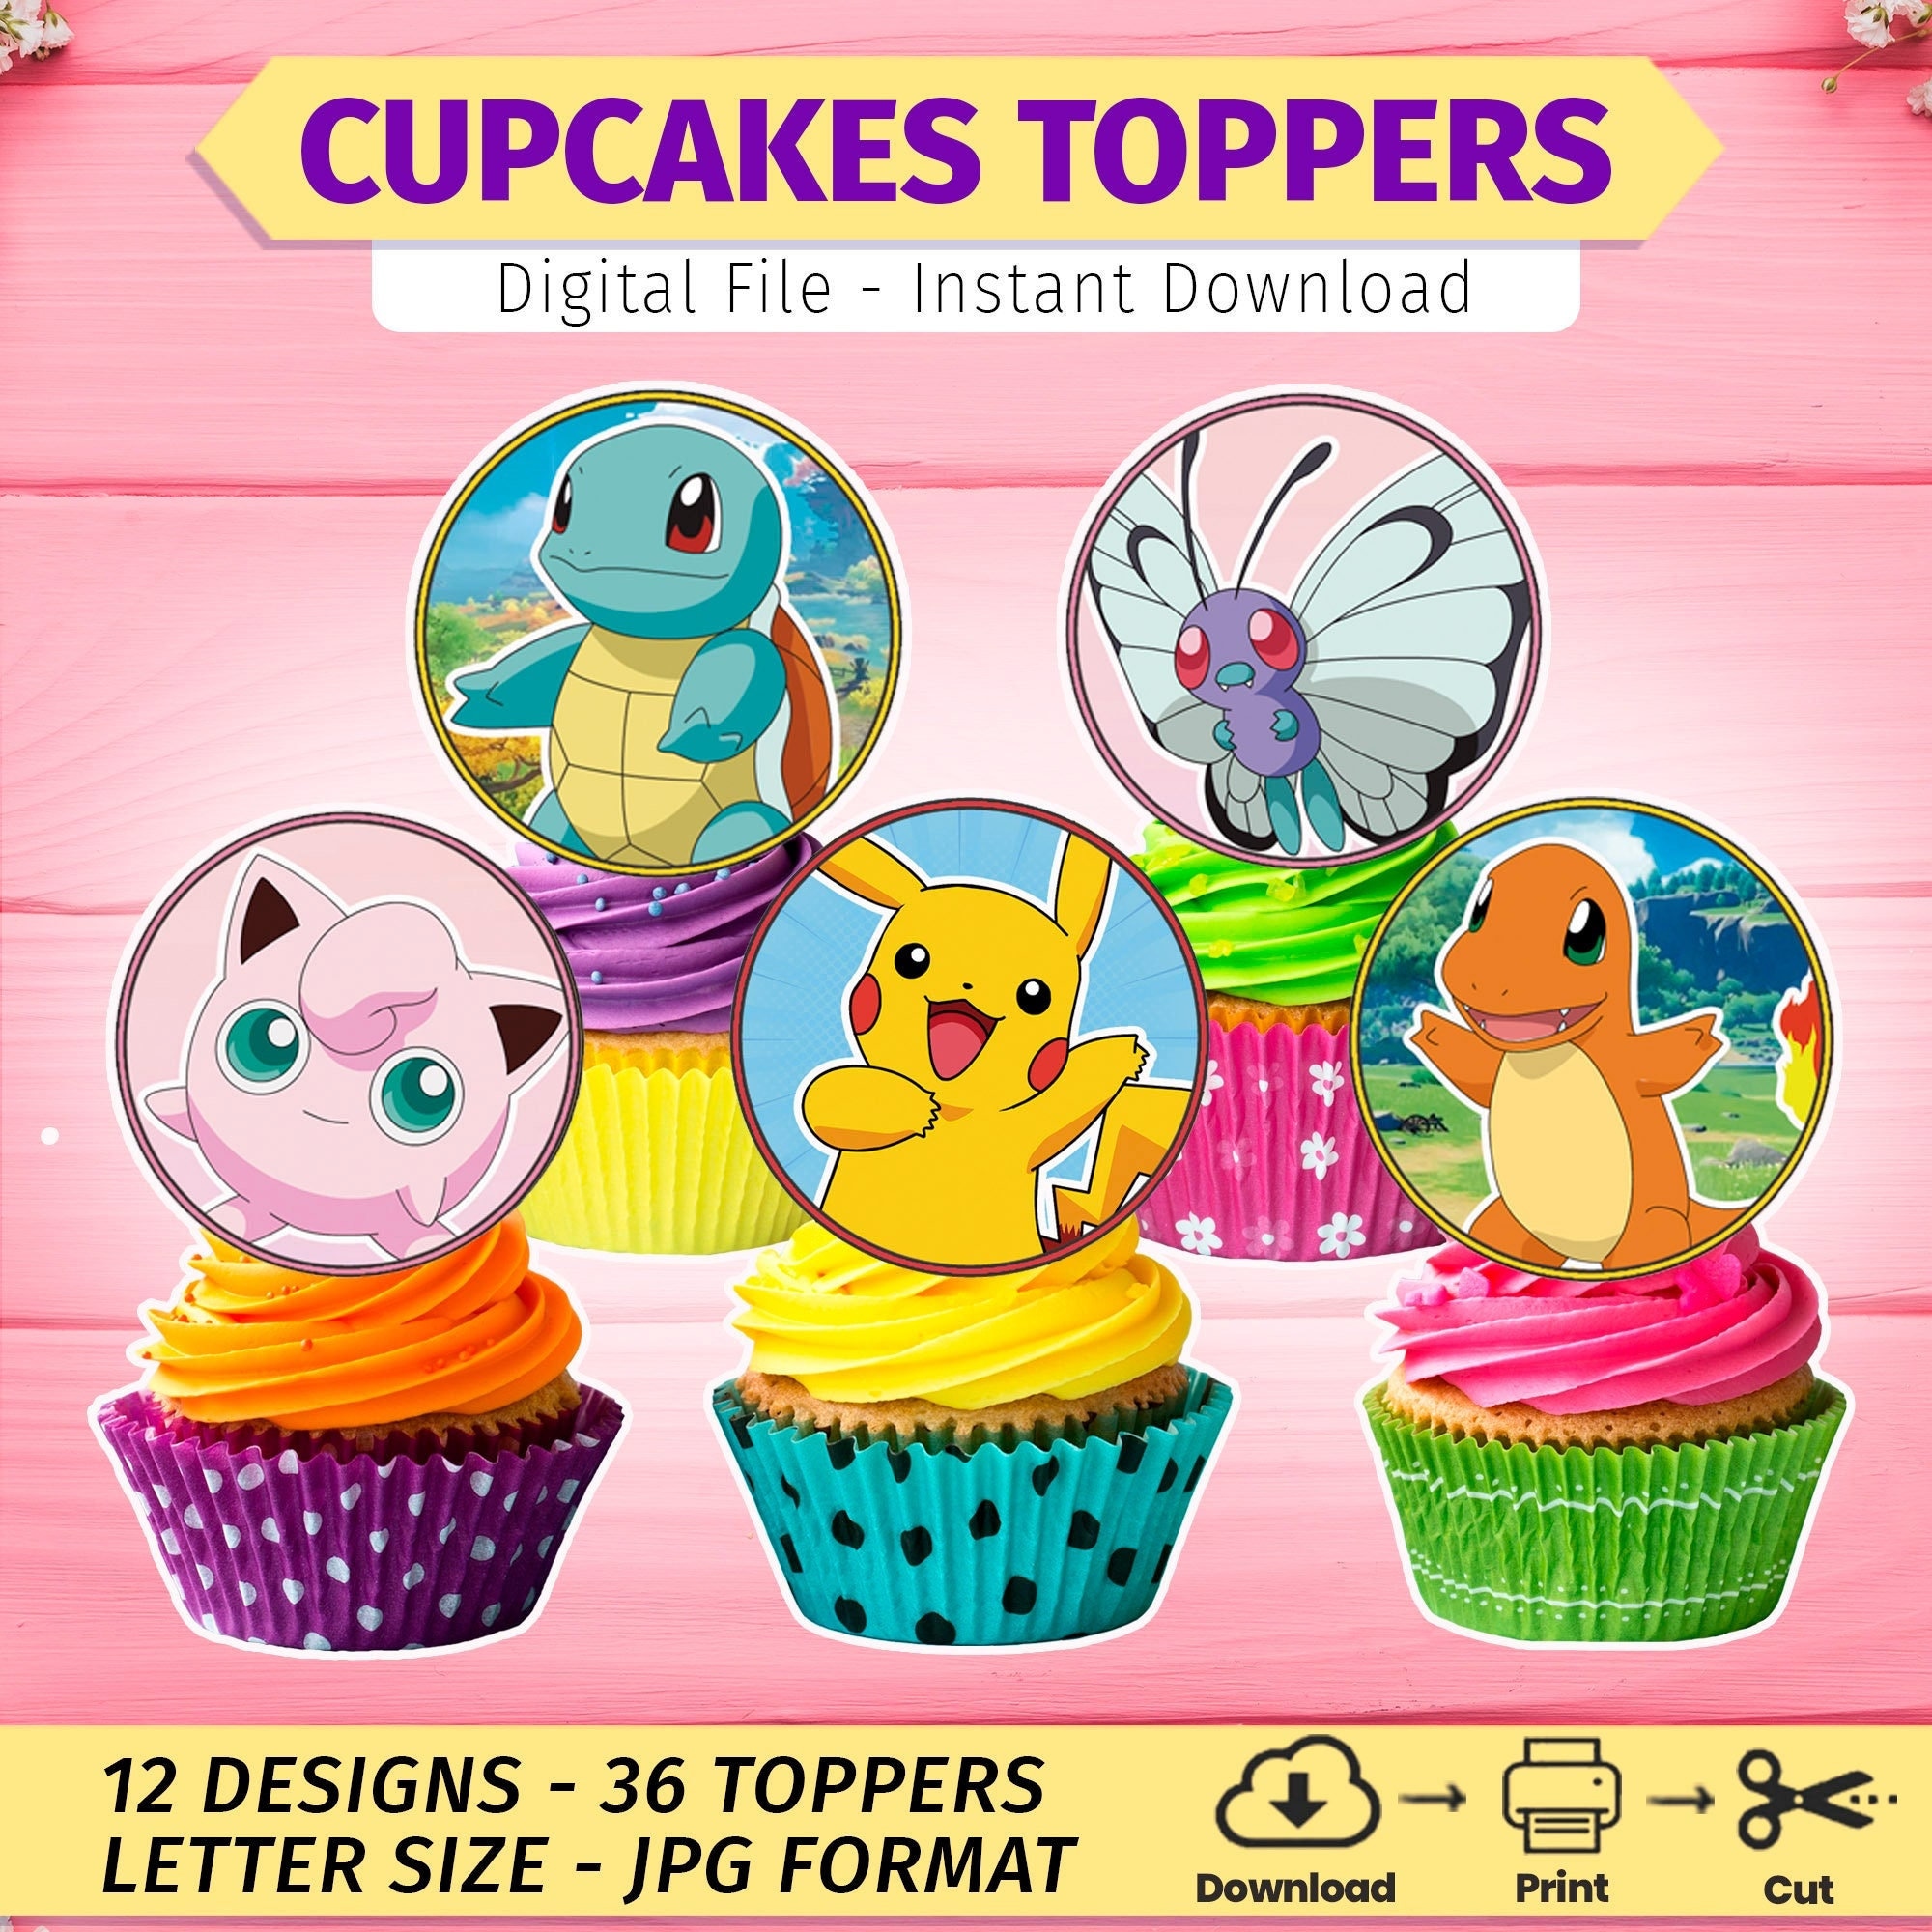 29 Pcs Cute Anime Cake Topper, Educatgame Kawaii Anime Cake Decorations  Figures Set, Great for Theme Birthday Party Decoration Supplies